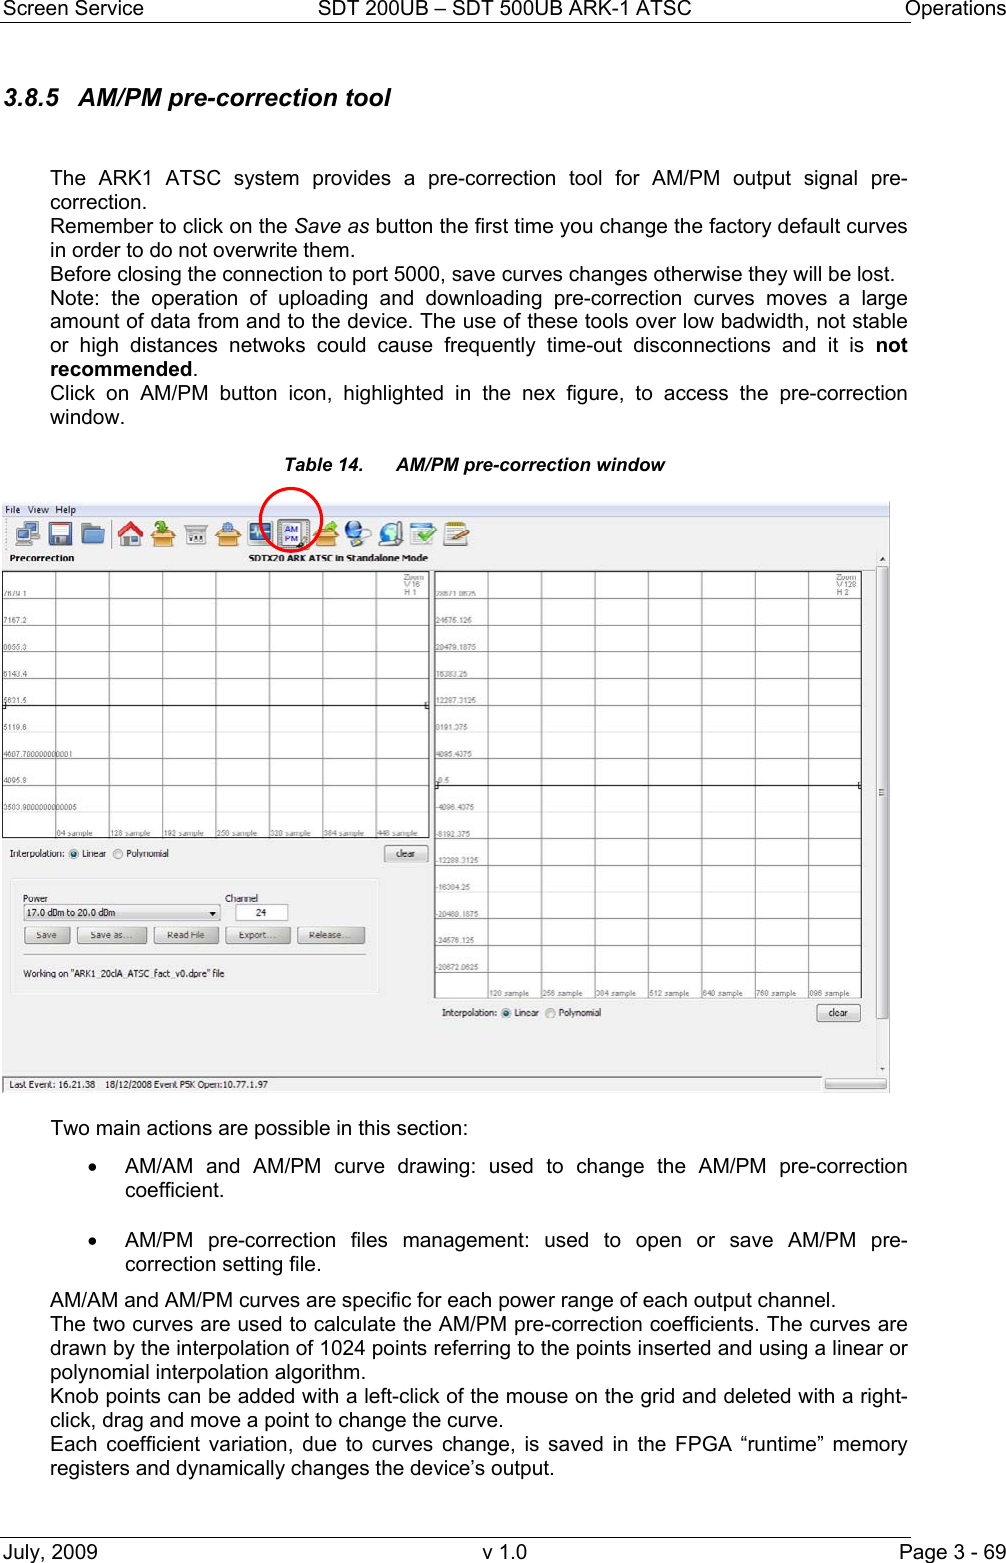 Screen Service  SDT 200UB – SDT 500UB ARK-1 ATSC  Operations July, 2009  v 1.0  Page 3 - 69 3.8.5  AM/PM pre-correction tool   The ARK1 ATSC system provides a pre-correction tool for AM/PM output signal pre-correction. Remember to click on the Save as button the first time you change the factory default curves in order to do not overwrite them.  Before closing the connection to port 5000, save curves changes otherwise they will be lost. Note: the operation of uploading and downloading pre-correction curves moves a large amount of data from and to the device. The use of these tools over low badwidth, not stable or high distances netwoks could cause frequently time-out disconnections and it is not recommended. Click on AM/PM button icon, highlighted in the nex figure, to access the pre-correction window. Table 14.  AM/PM pre-correction window   Two main actions are possible in this section: •  AM/AM and AM/PM curve drawing: used to change the AM/PM pre-correction coefficient. •  AM/PM pre-correction files management: used to open or save AM/PM pre-correction setting file. AM/AM and AM/PM curves are specific for each power range of each output channel. The two curves are used to calculate the AM/PM pre-correction coefficients. The curves are drawn by the interpolation of 1024 points referring to the points inserted and using a linear or polynomial interpolation algorithm. Knob points can be added with a left-click of the mouse on the grid and deleted with a right-click, drag and move a point to change the curve. Each coefficient variation, due to curves change, is saved in the FPGA “runtime” memory registers and dynamically changes the device’s output.  